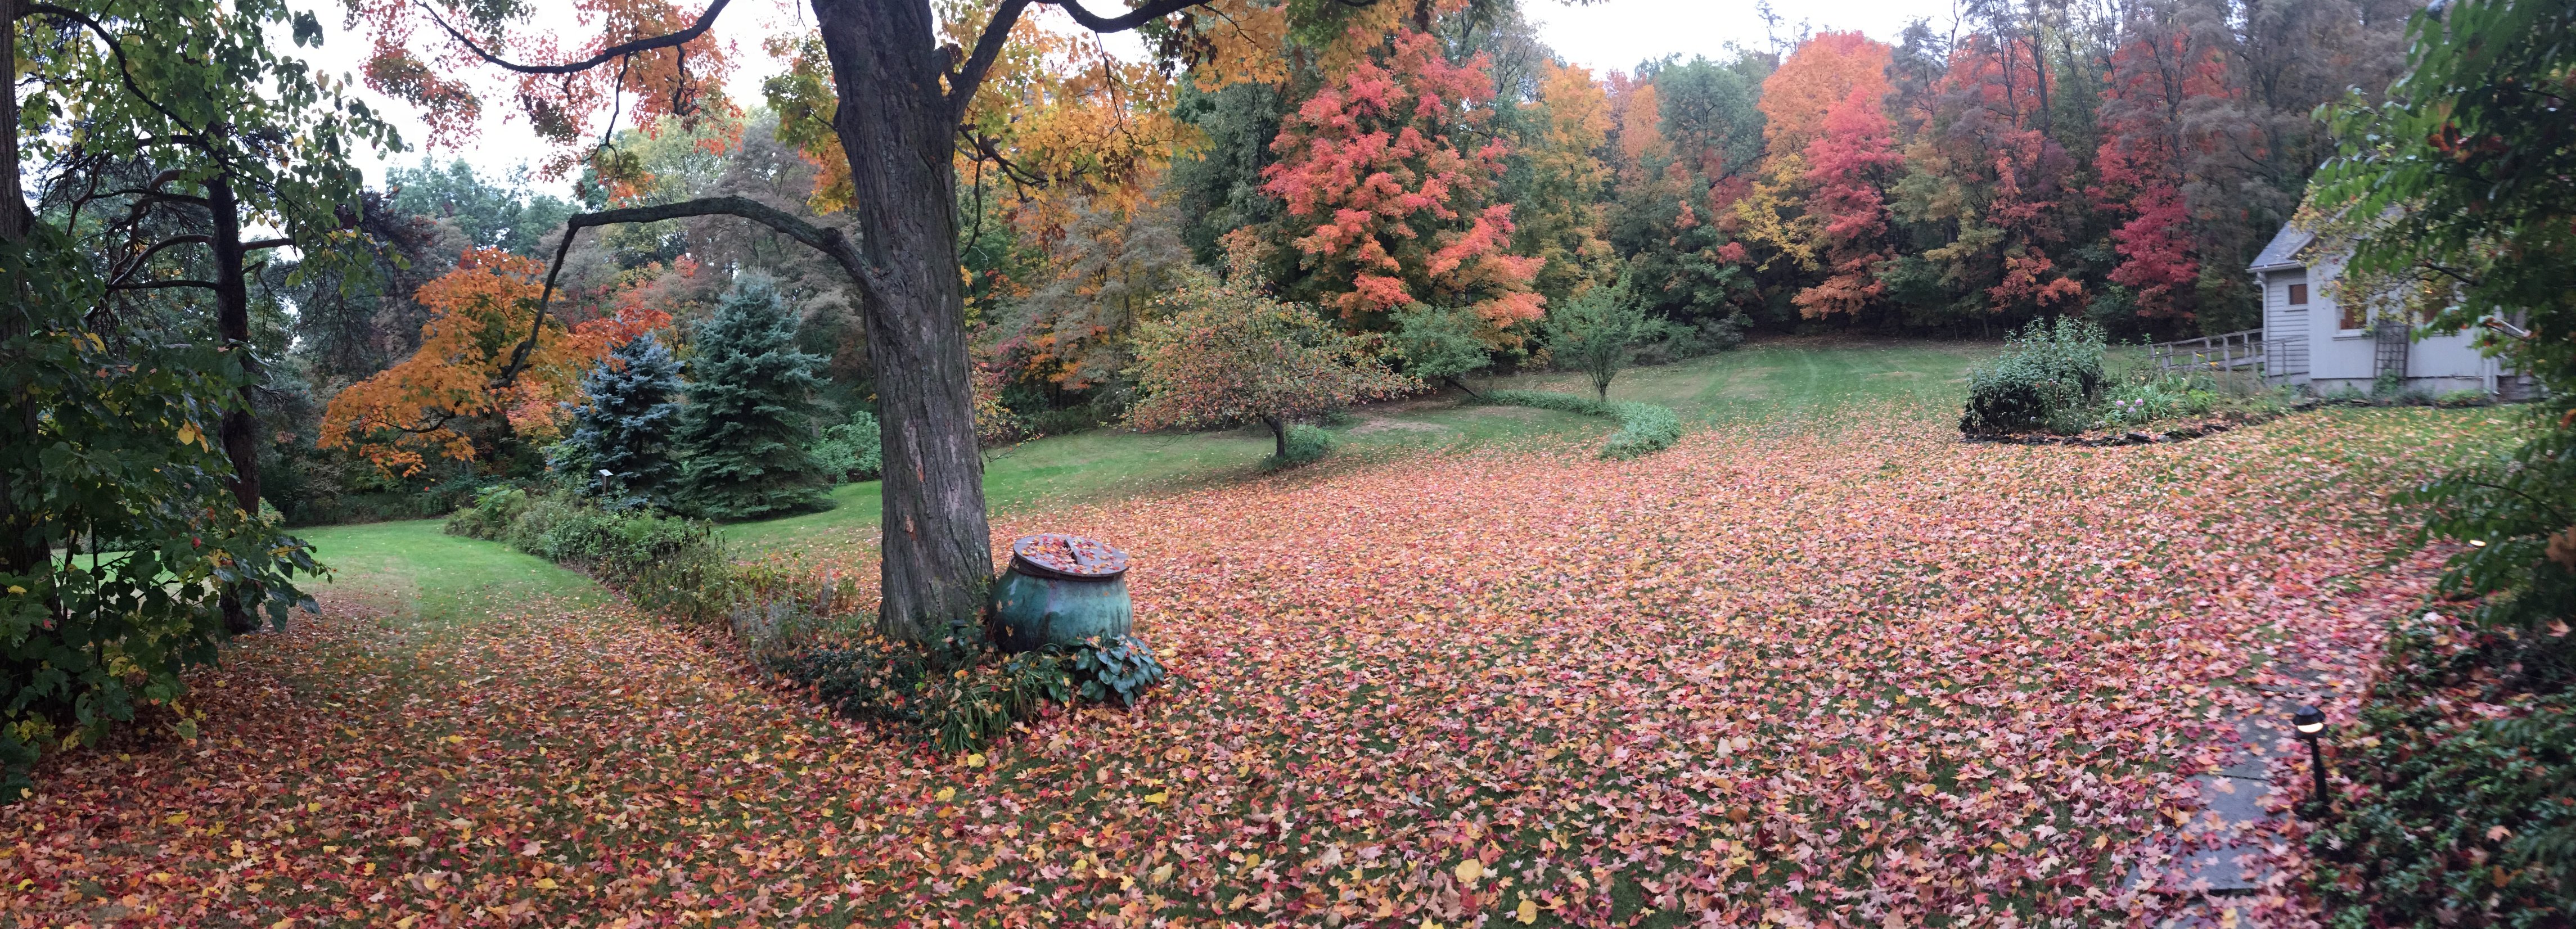 Panoramic shot from the porch after rain brought down a lot more leaves